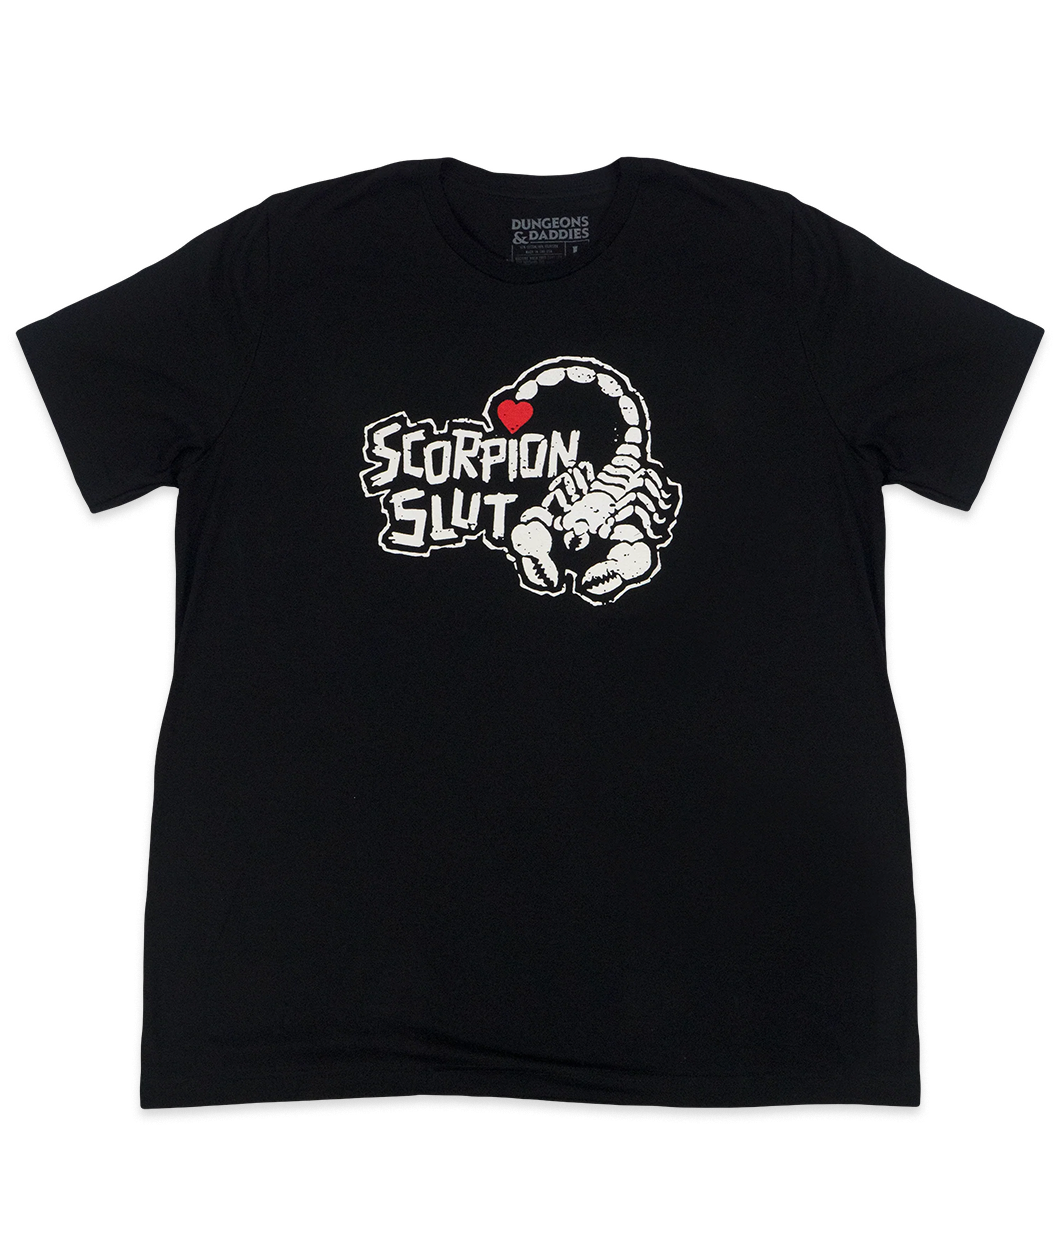 Black T-Shirt with the words, "SCORPION SLUT" and a scorpion in white with the poison dart at the end of its tail in red in the shape of a heart.